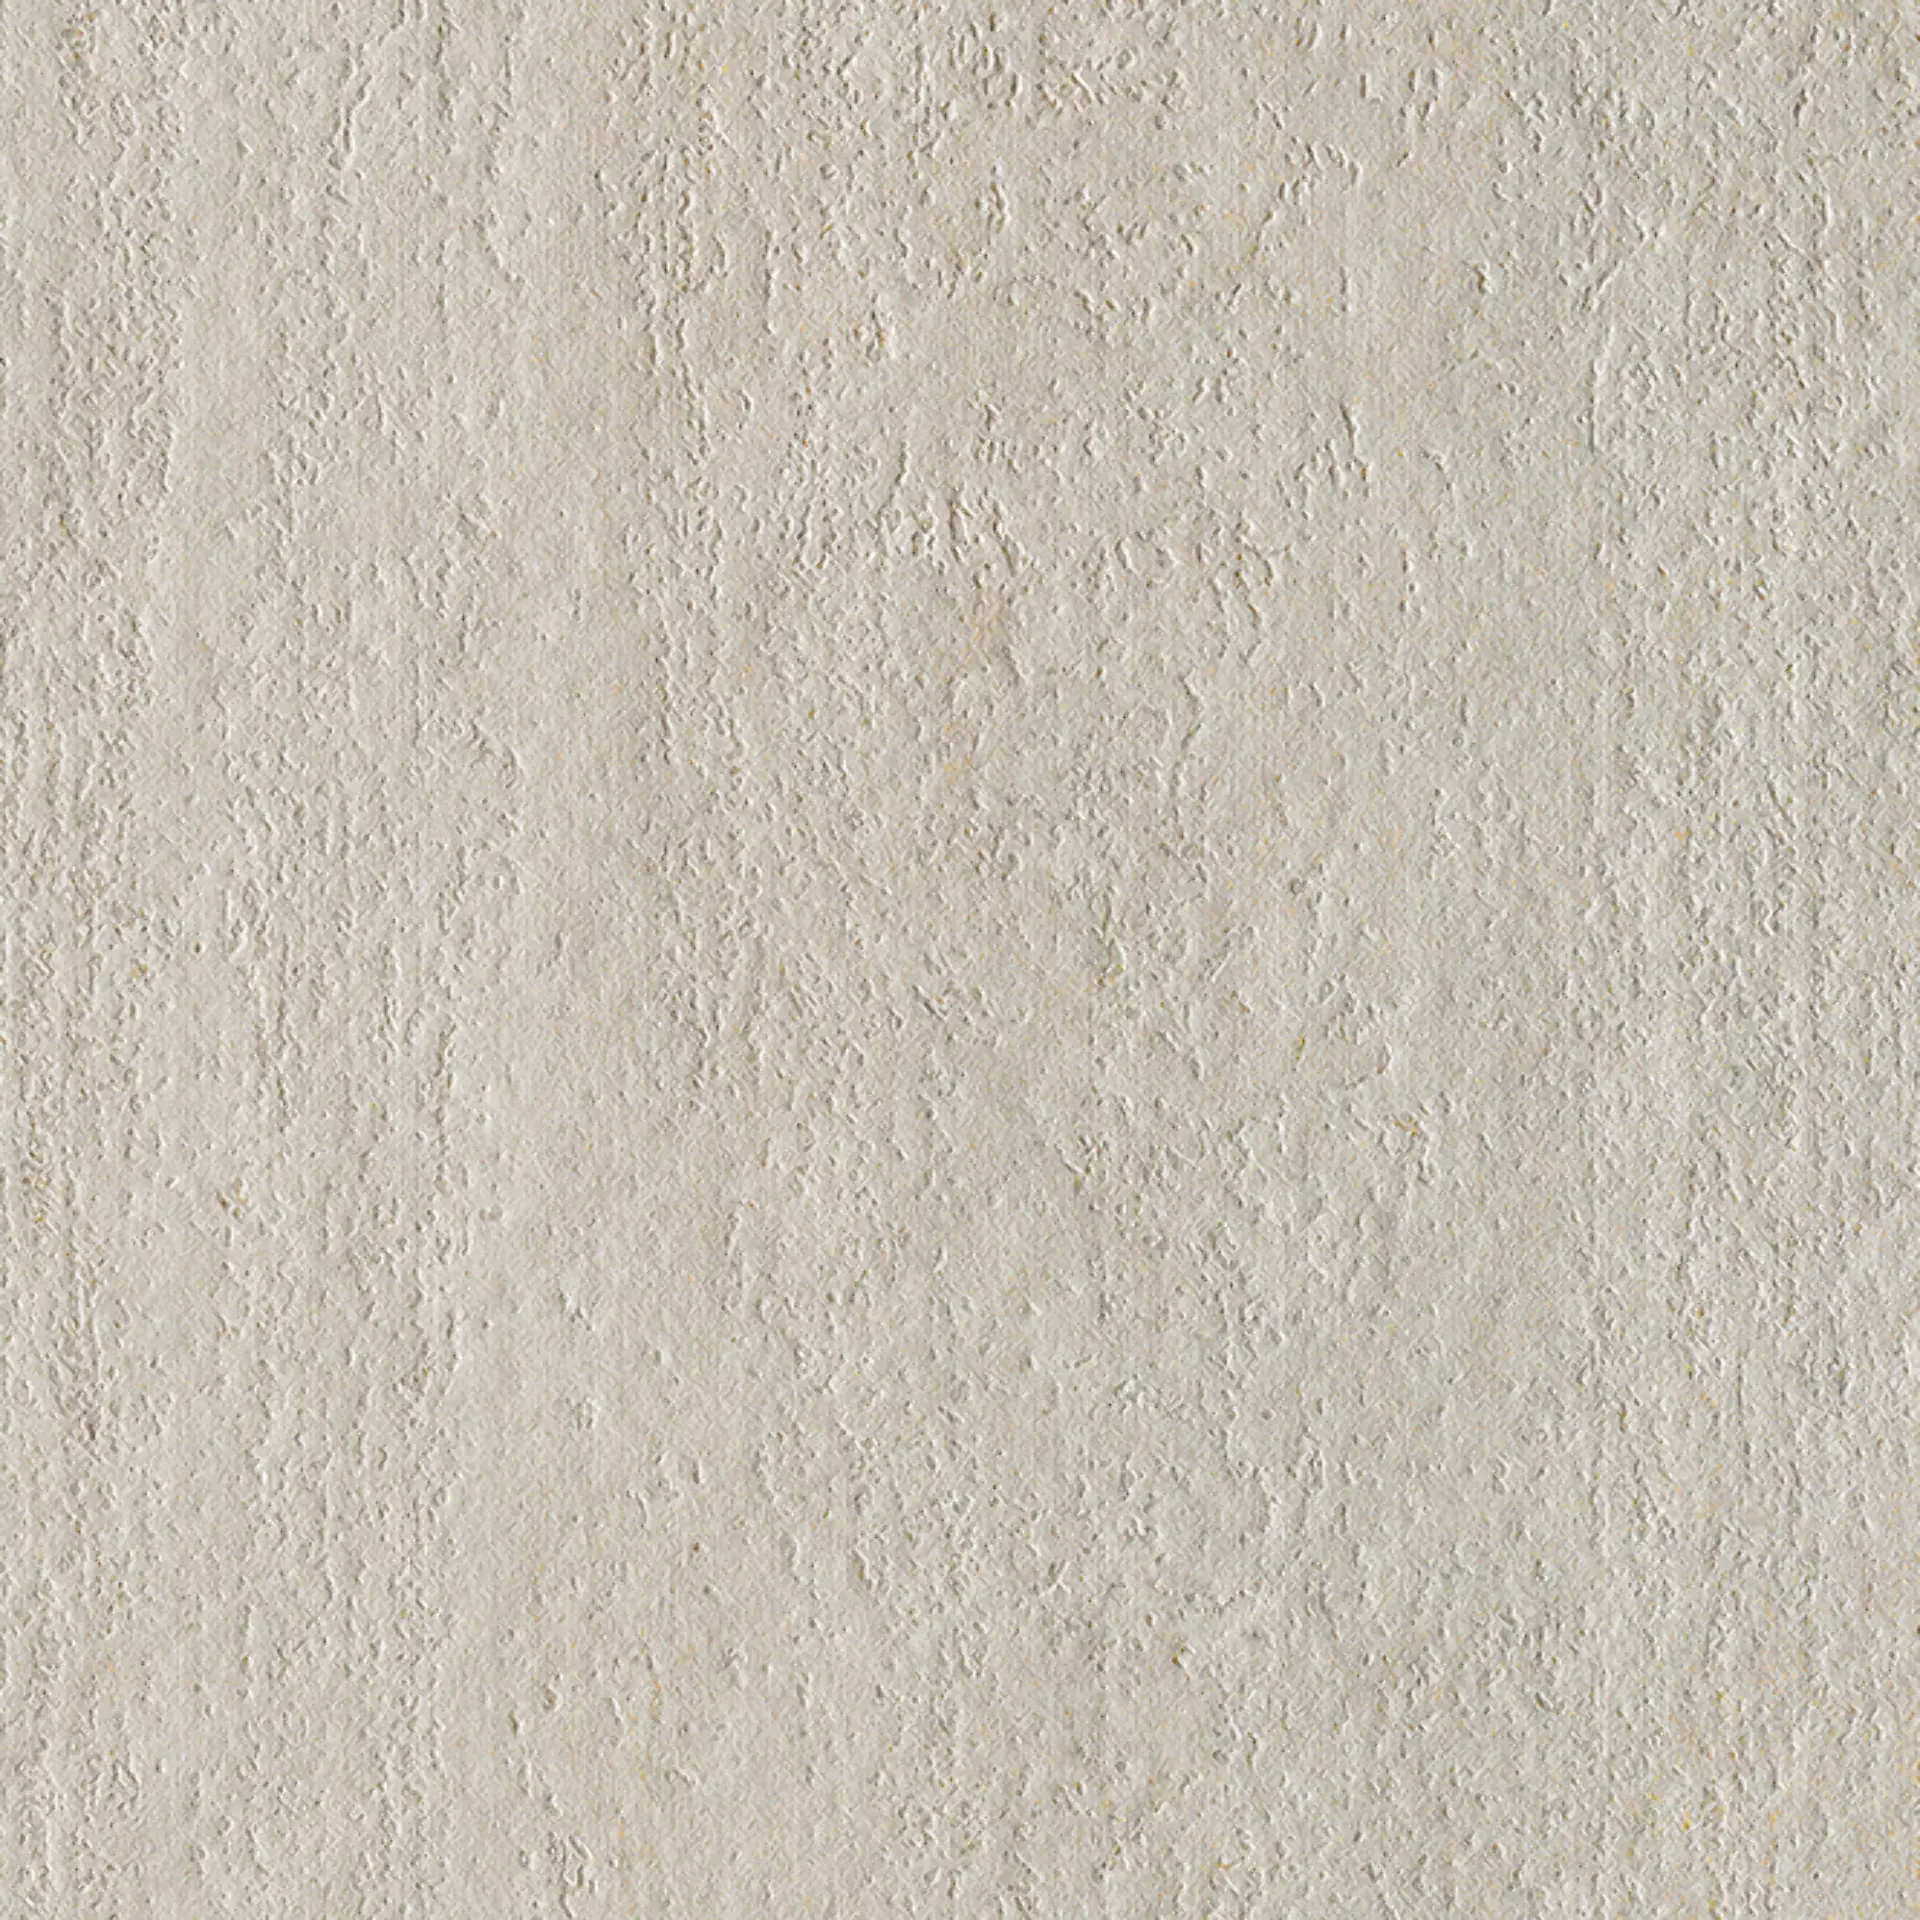 Del Conca Hse Stone Edition Dinamik Travertino Hse Naturale G9SE10R 60x60cm rectified 8,5mm